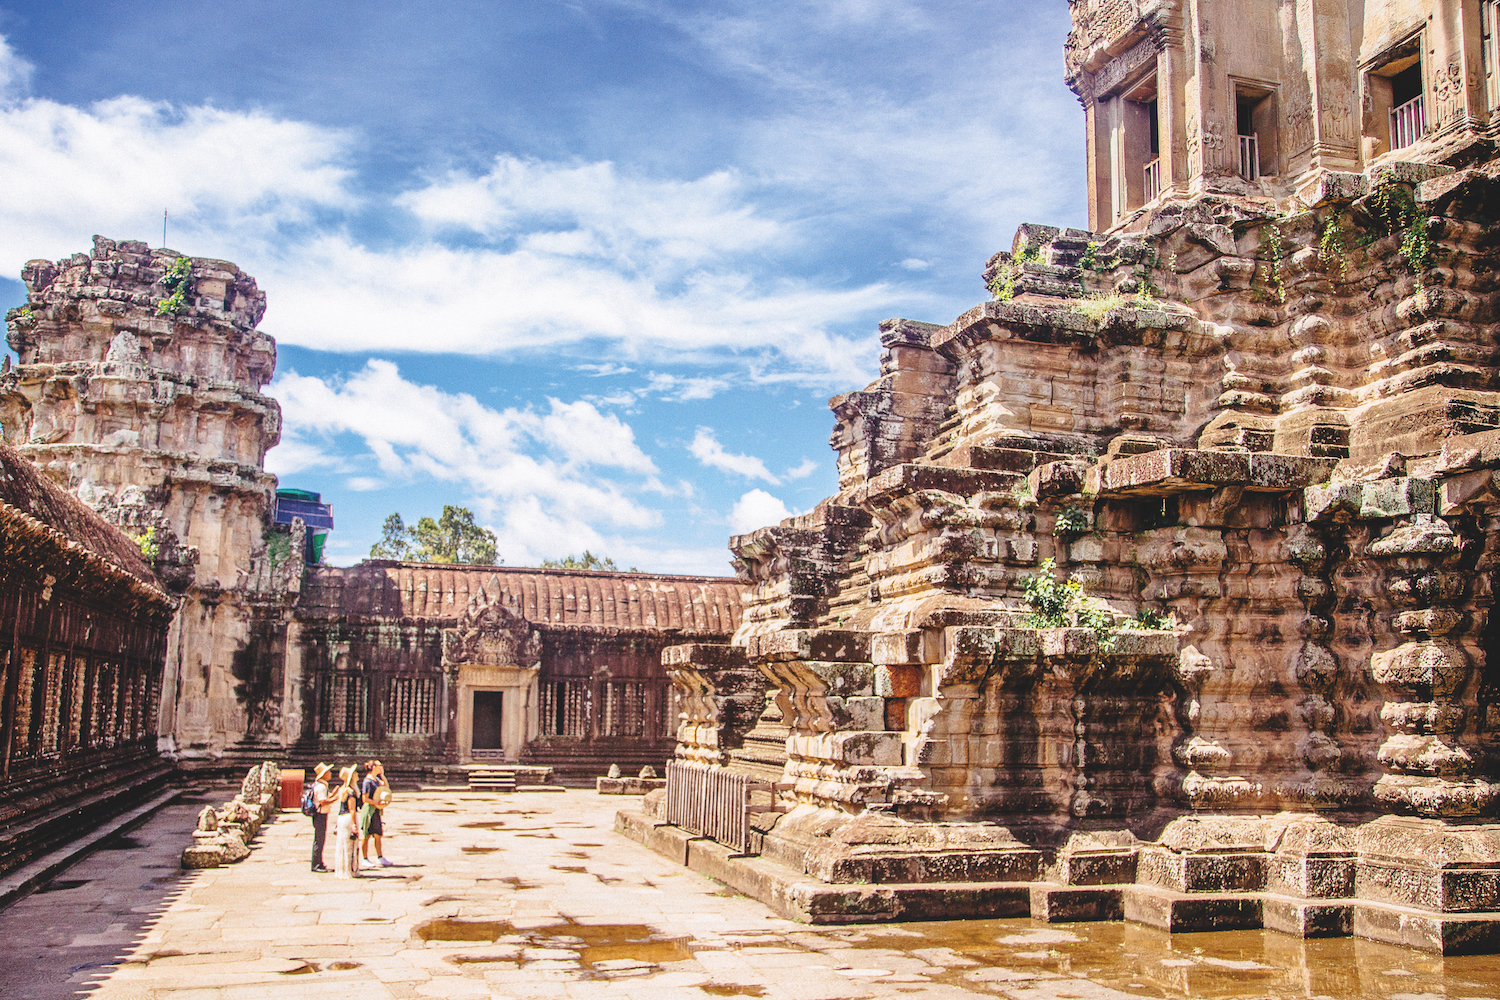 8 Angkor Wat facts that will blow your mind | The Collective - Powered by Topdeck Travel